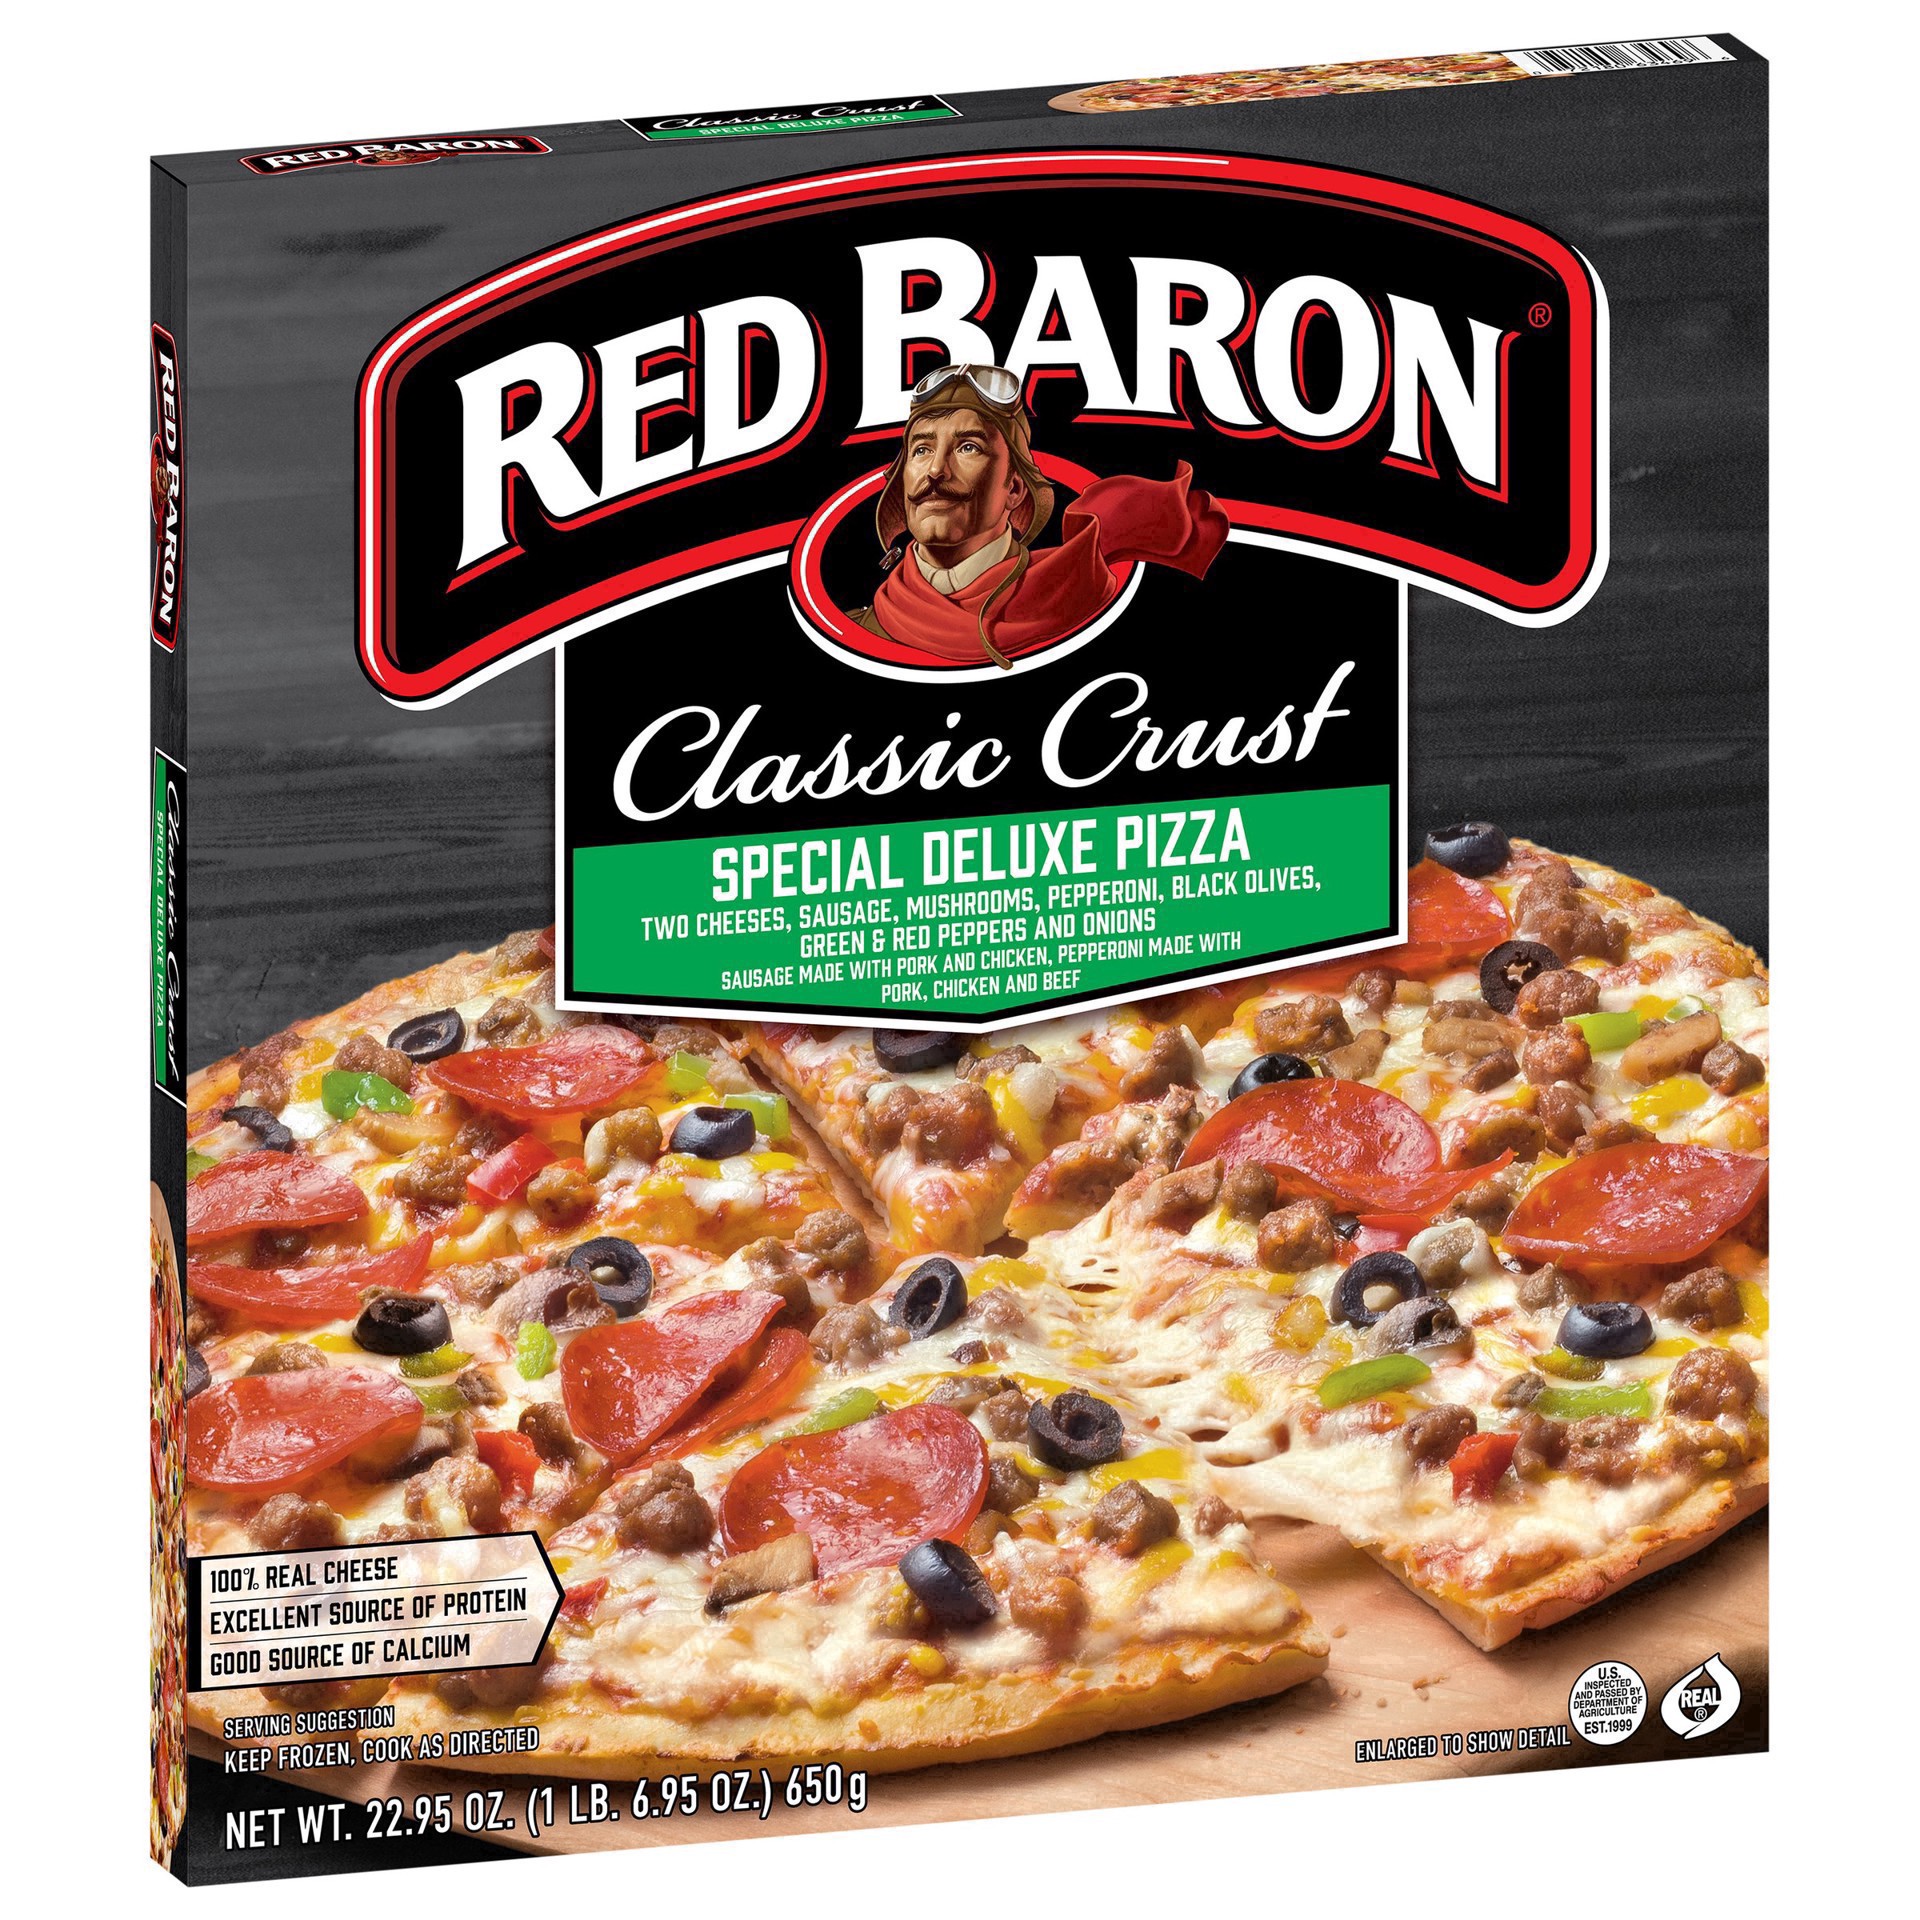 slide 80 of 89, Red Baron Frozen Pizza Classic Crust Special Deluxe, 1.43 lb